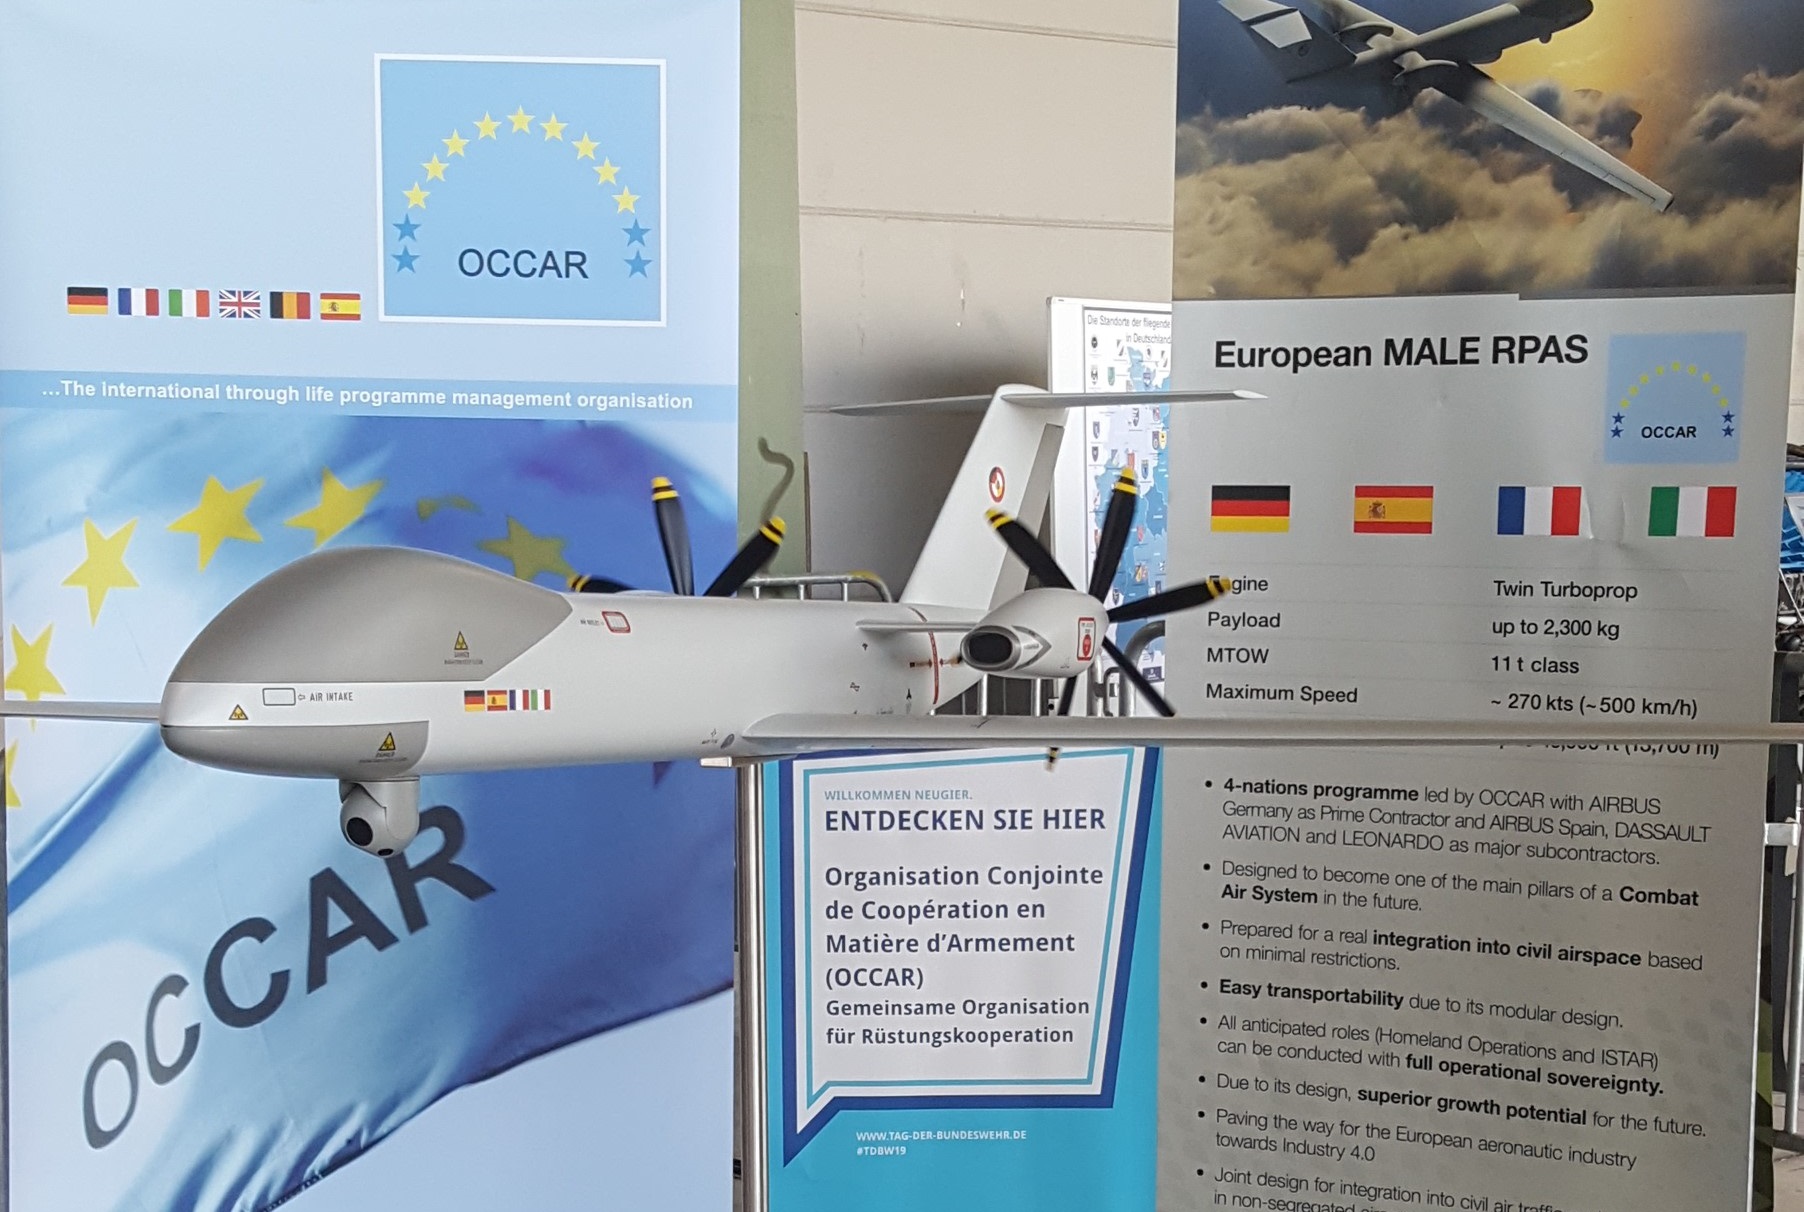 The European Medium Altitude Long Endurance Remotely Piloted Aircraft System (MALE RPAS) is a twin-turboprop MALE UAV developed by Airbus, Dassault Aviation and Leonardo for Germany, France, Italy and Spain, to be introduced in 2025.